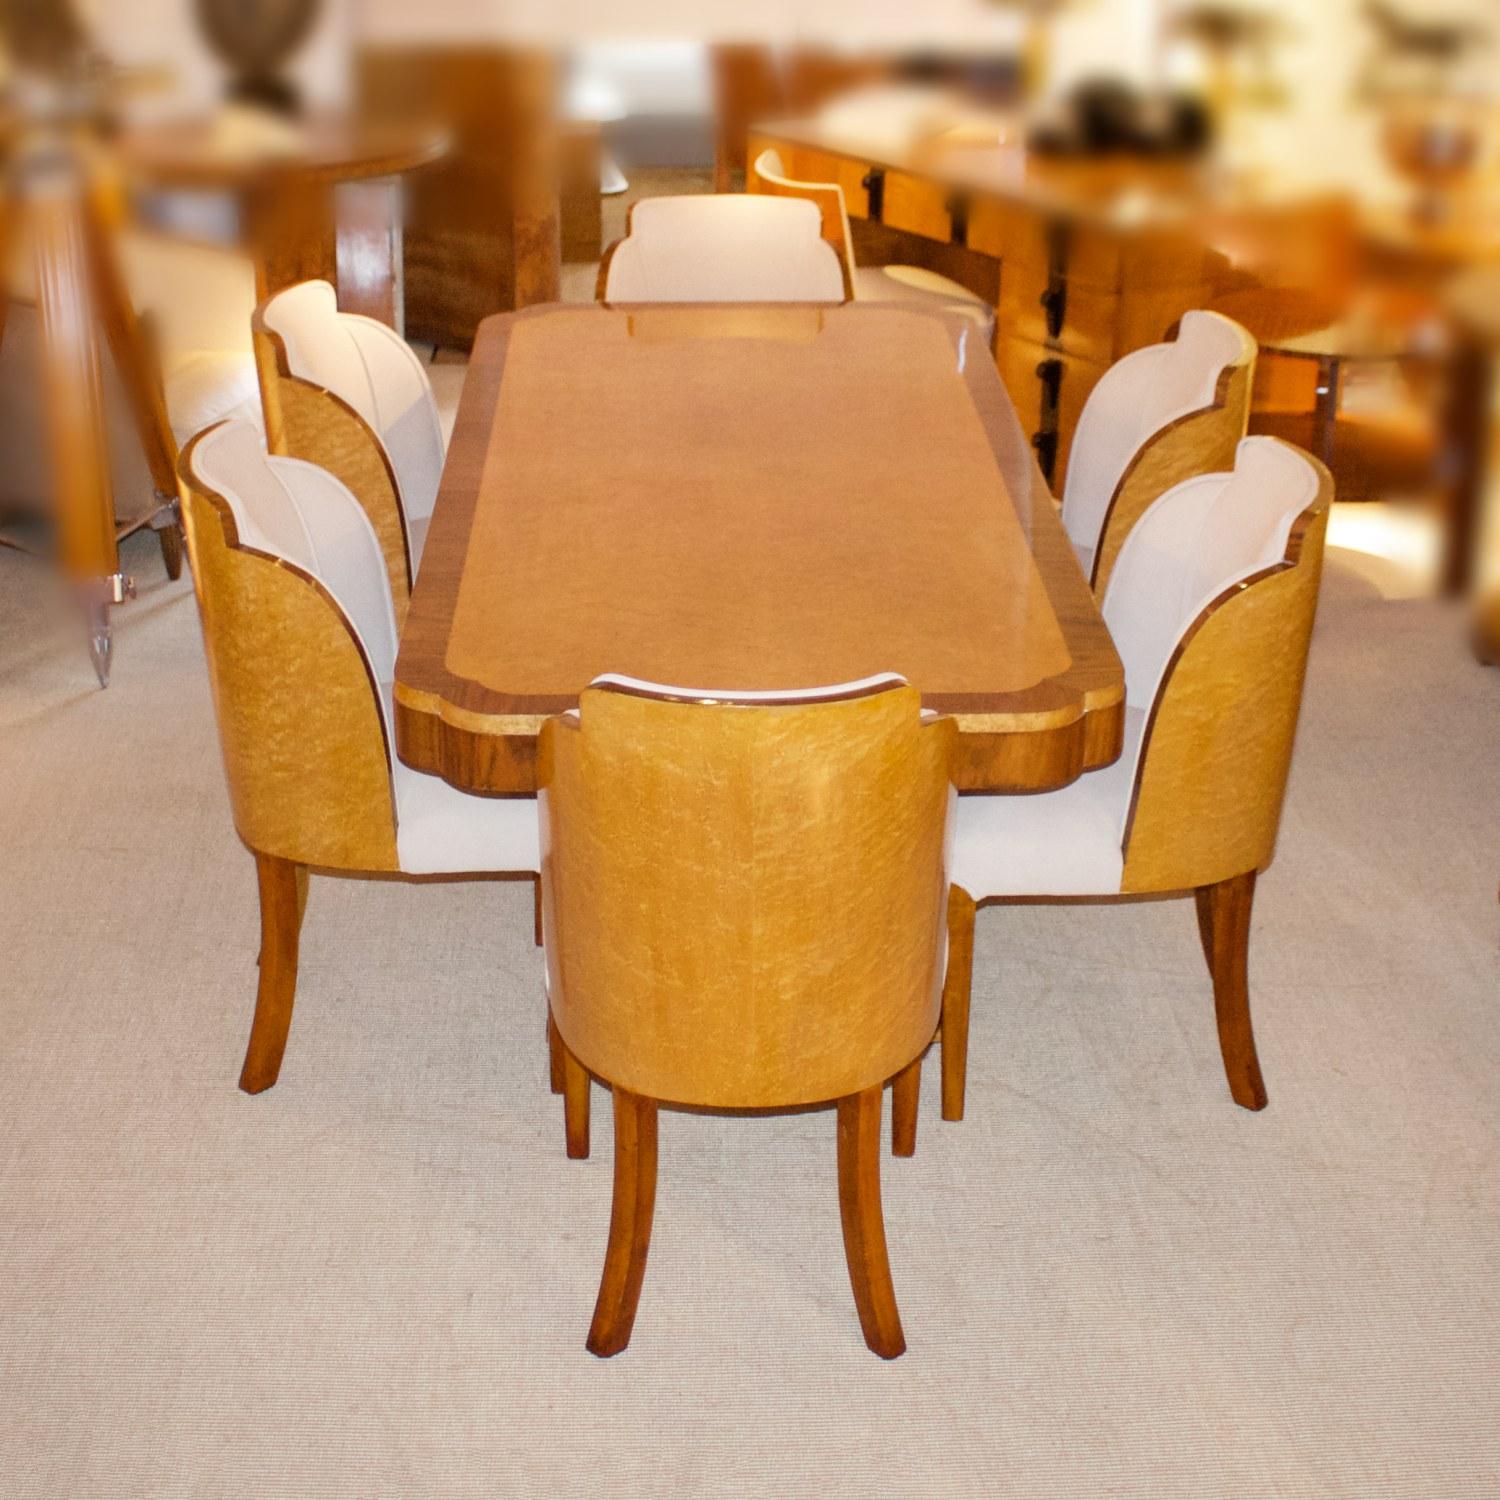 An Art Deco 6-seat cloud form dining suite by Harry & Lou Epstein bird's-eye maple and burr walnut Veneered tabletop over a bird's-eye maple and walnut U-shaped base. Six cloud backed dining chairs with bird's-eye maple veneers and solid walnut